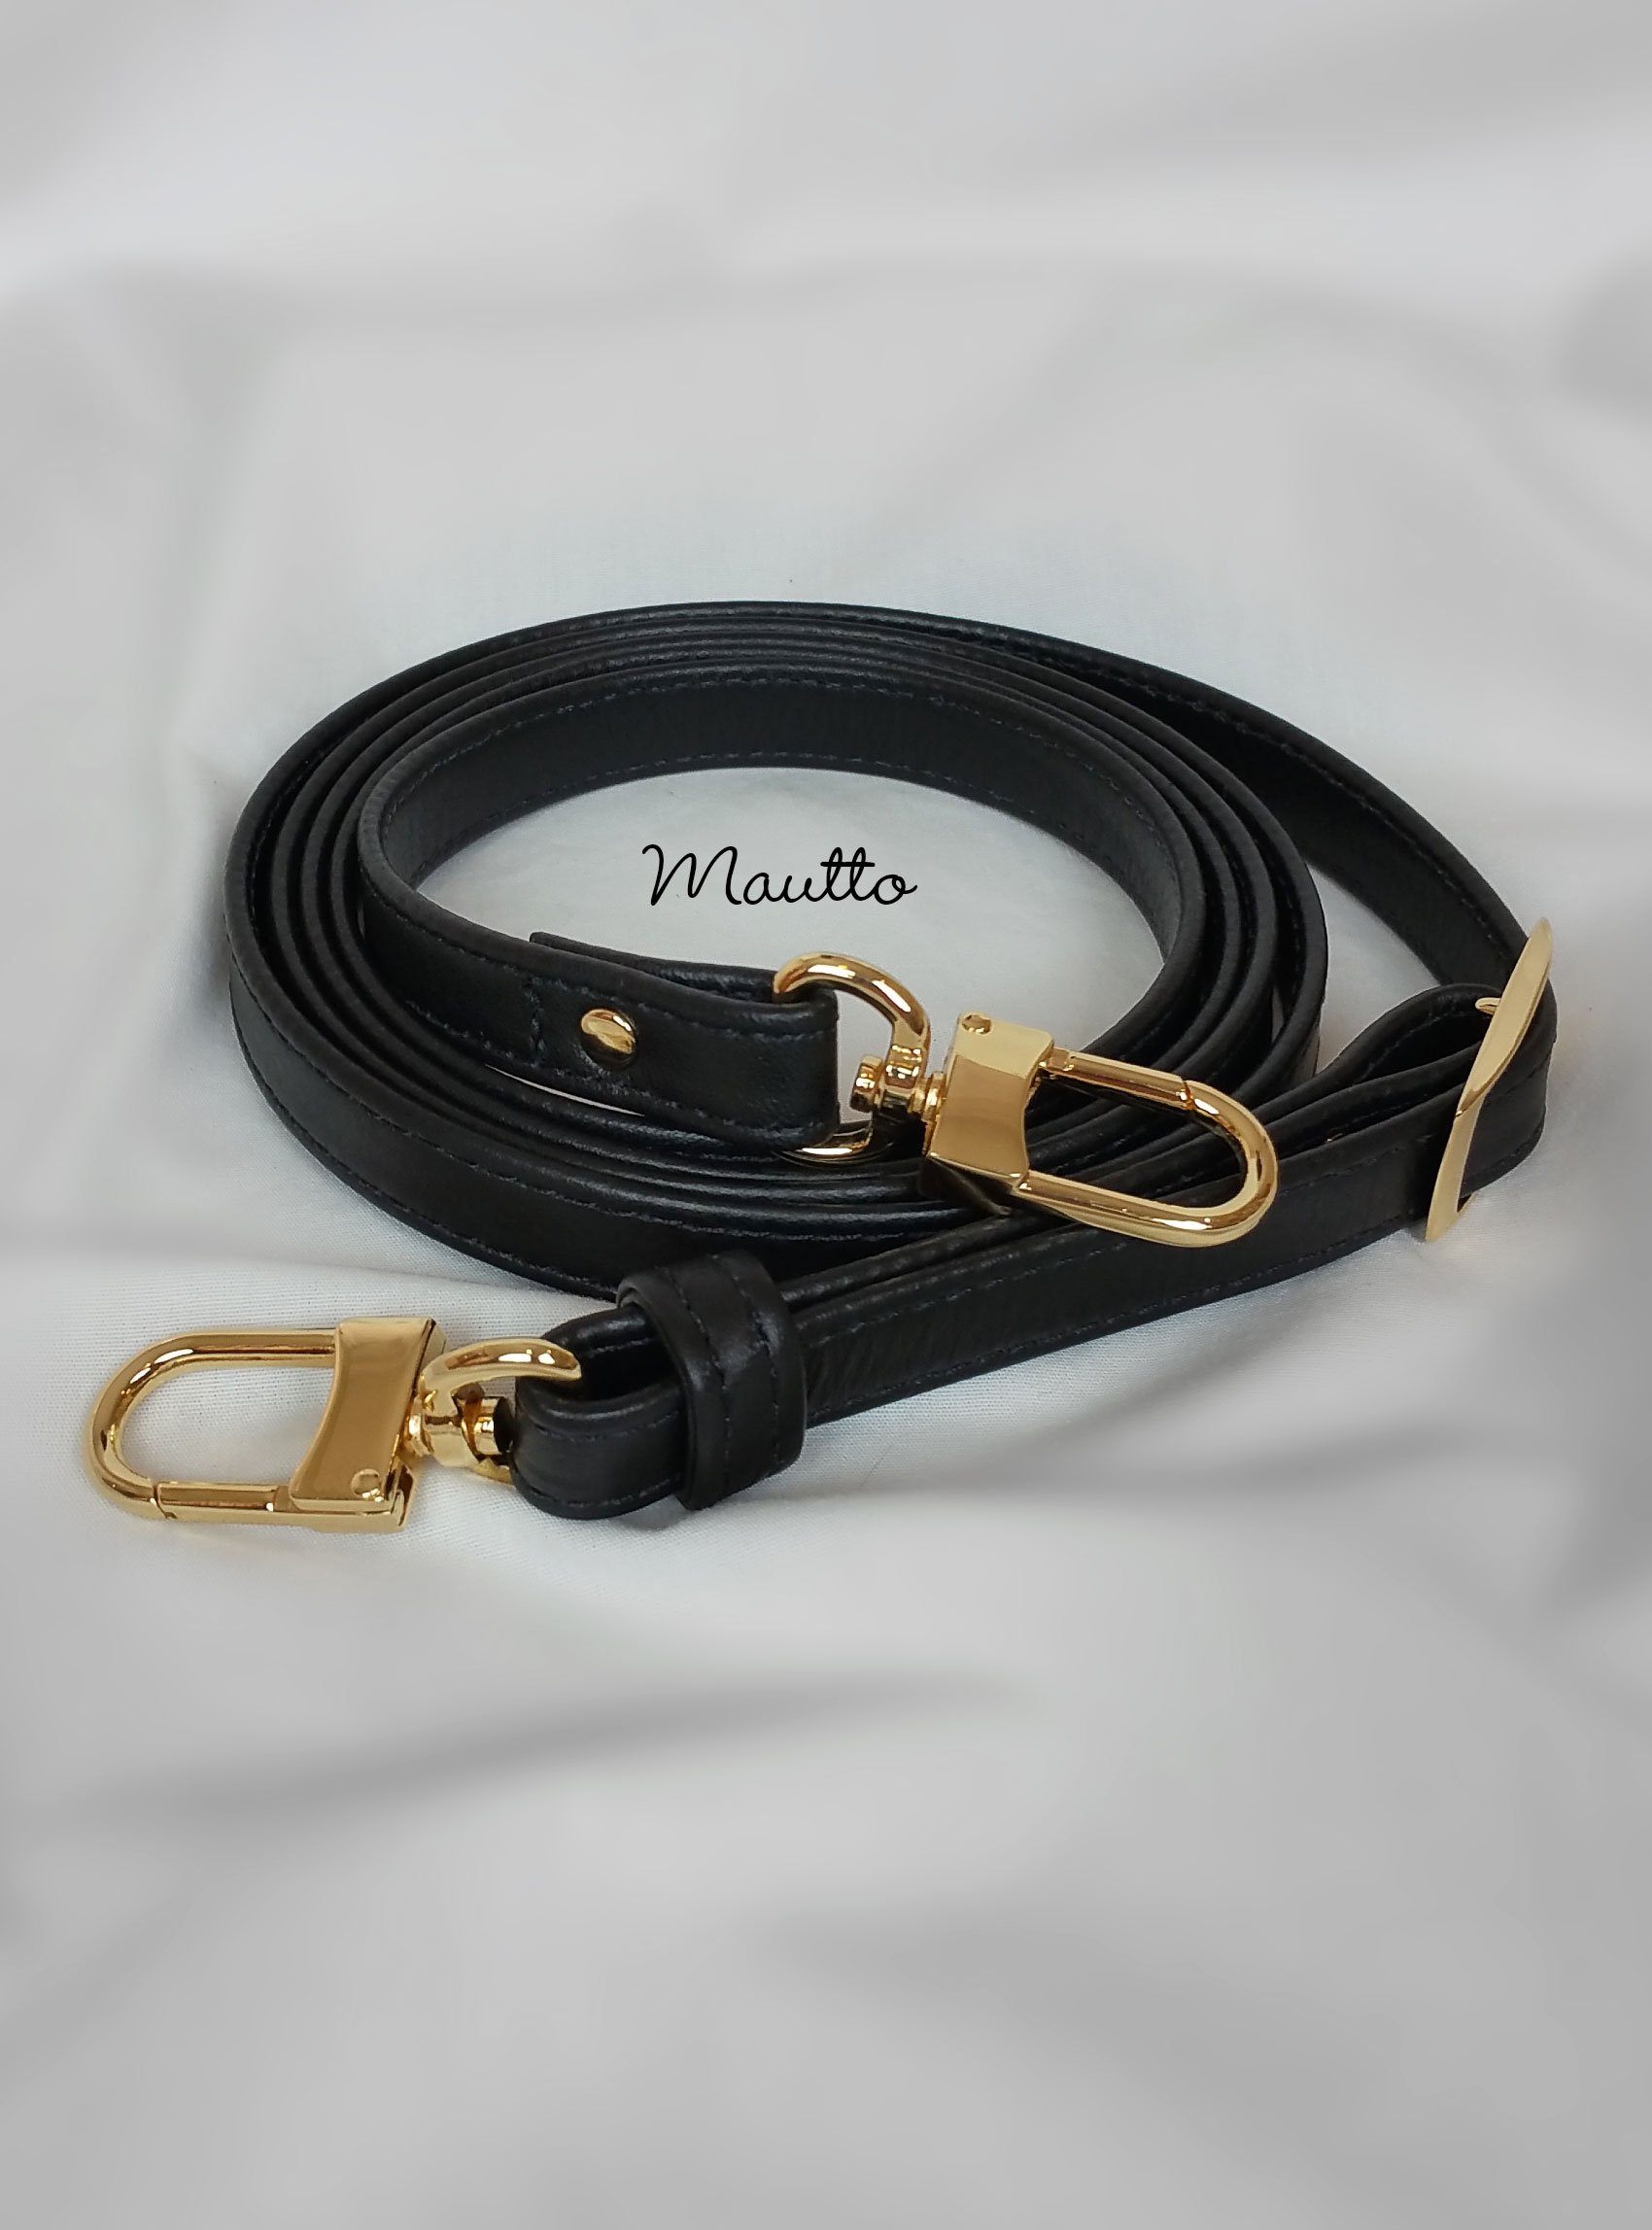 Black Leather Strap for Vuitton Pochette/Alma/Eva/etc - .5" Wide - Fixed or Adjustable Lengths Replacement Purse Straps & Accessories - Leather, Chain & more | Mautto